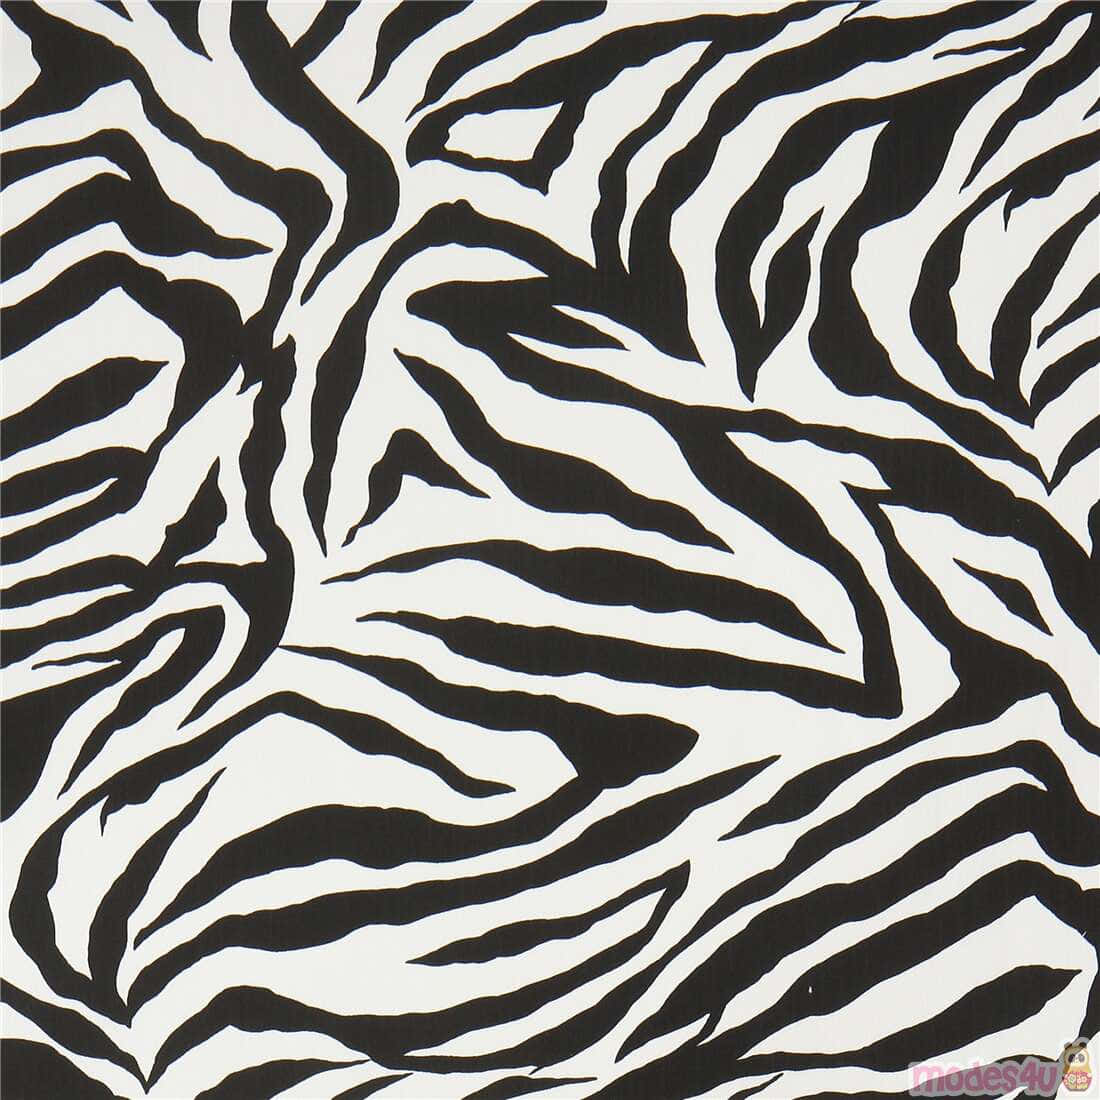 Download Black And White Animal Print Wallpaper | Wallpapers.com